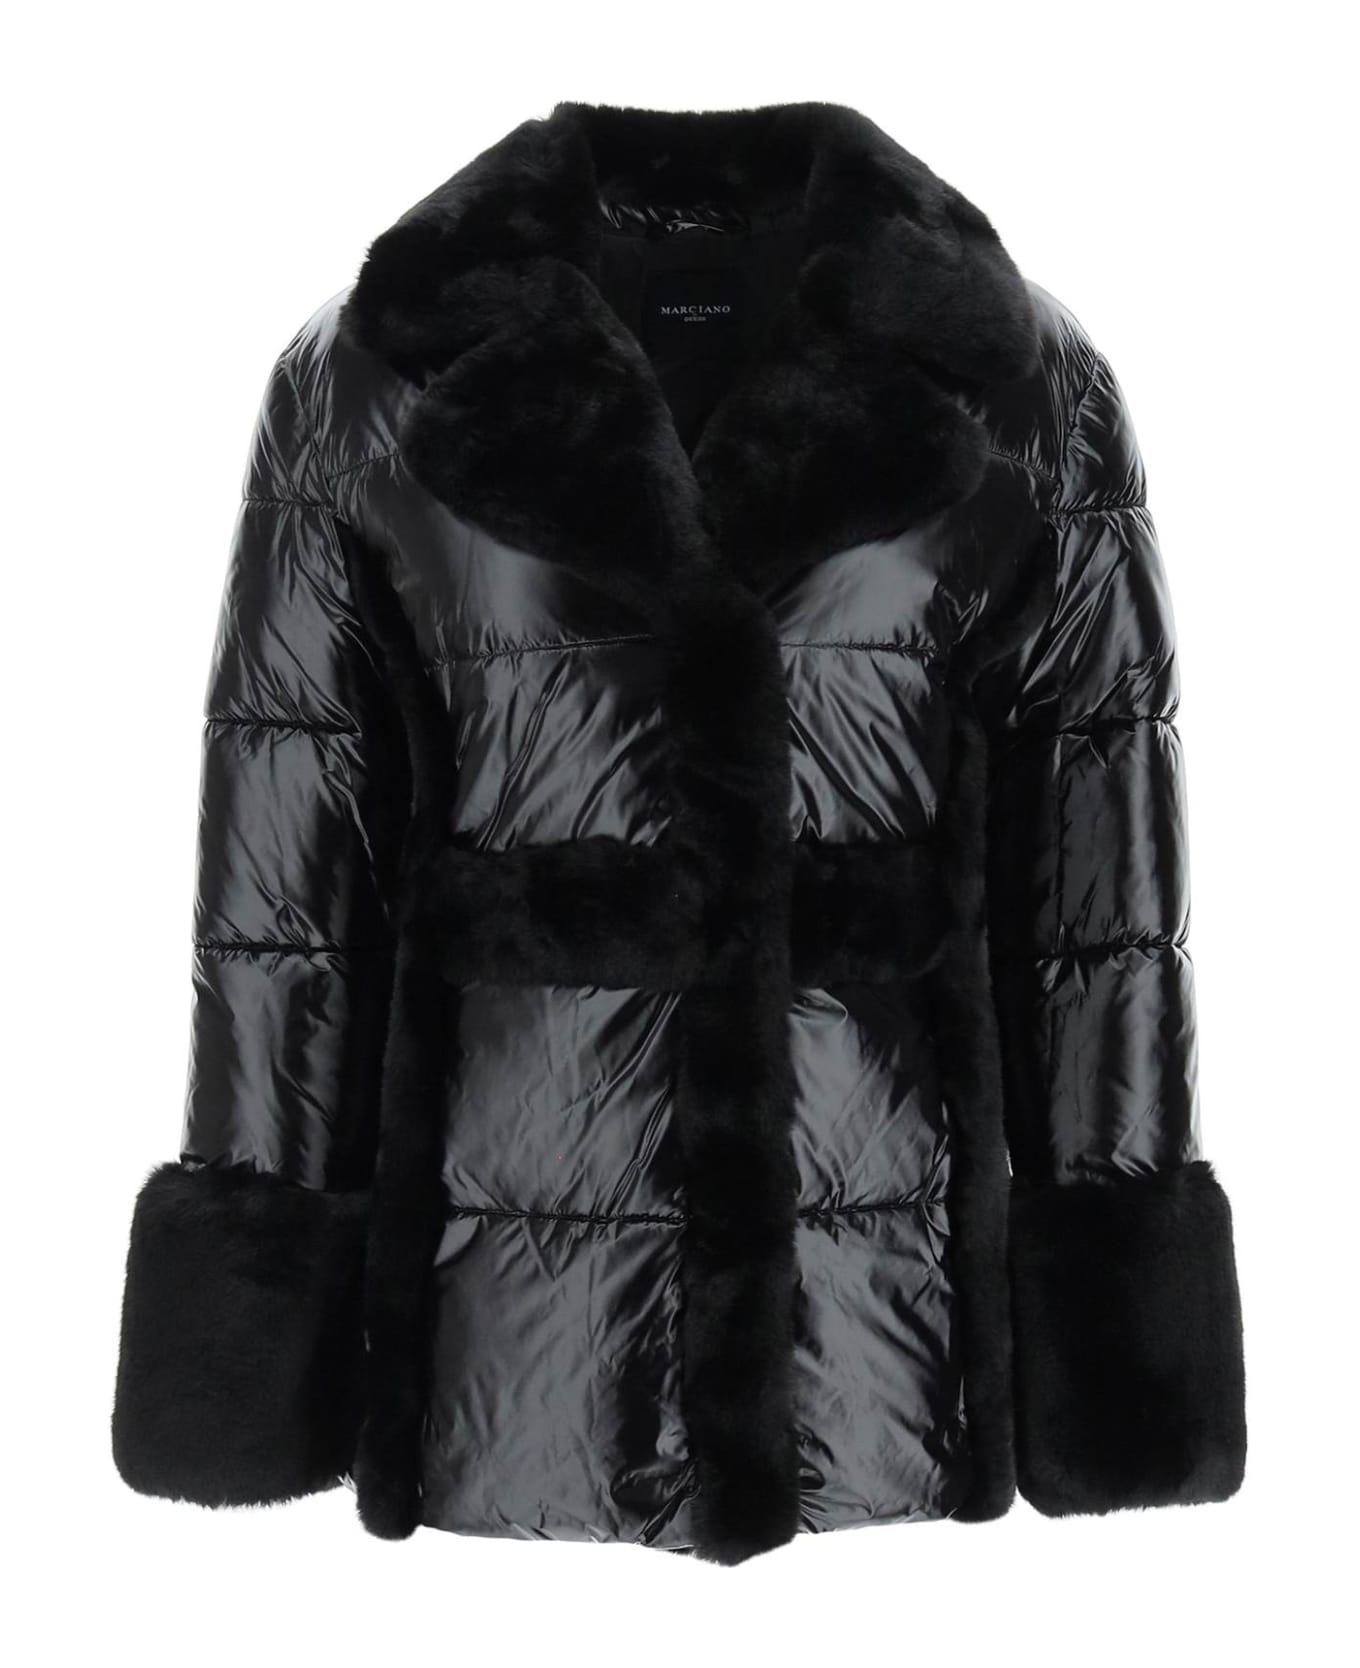 Guess by Marciano Puffer Jacket With Faux Fur Details - JET BLACK A996 (Black)